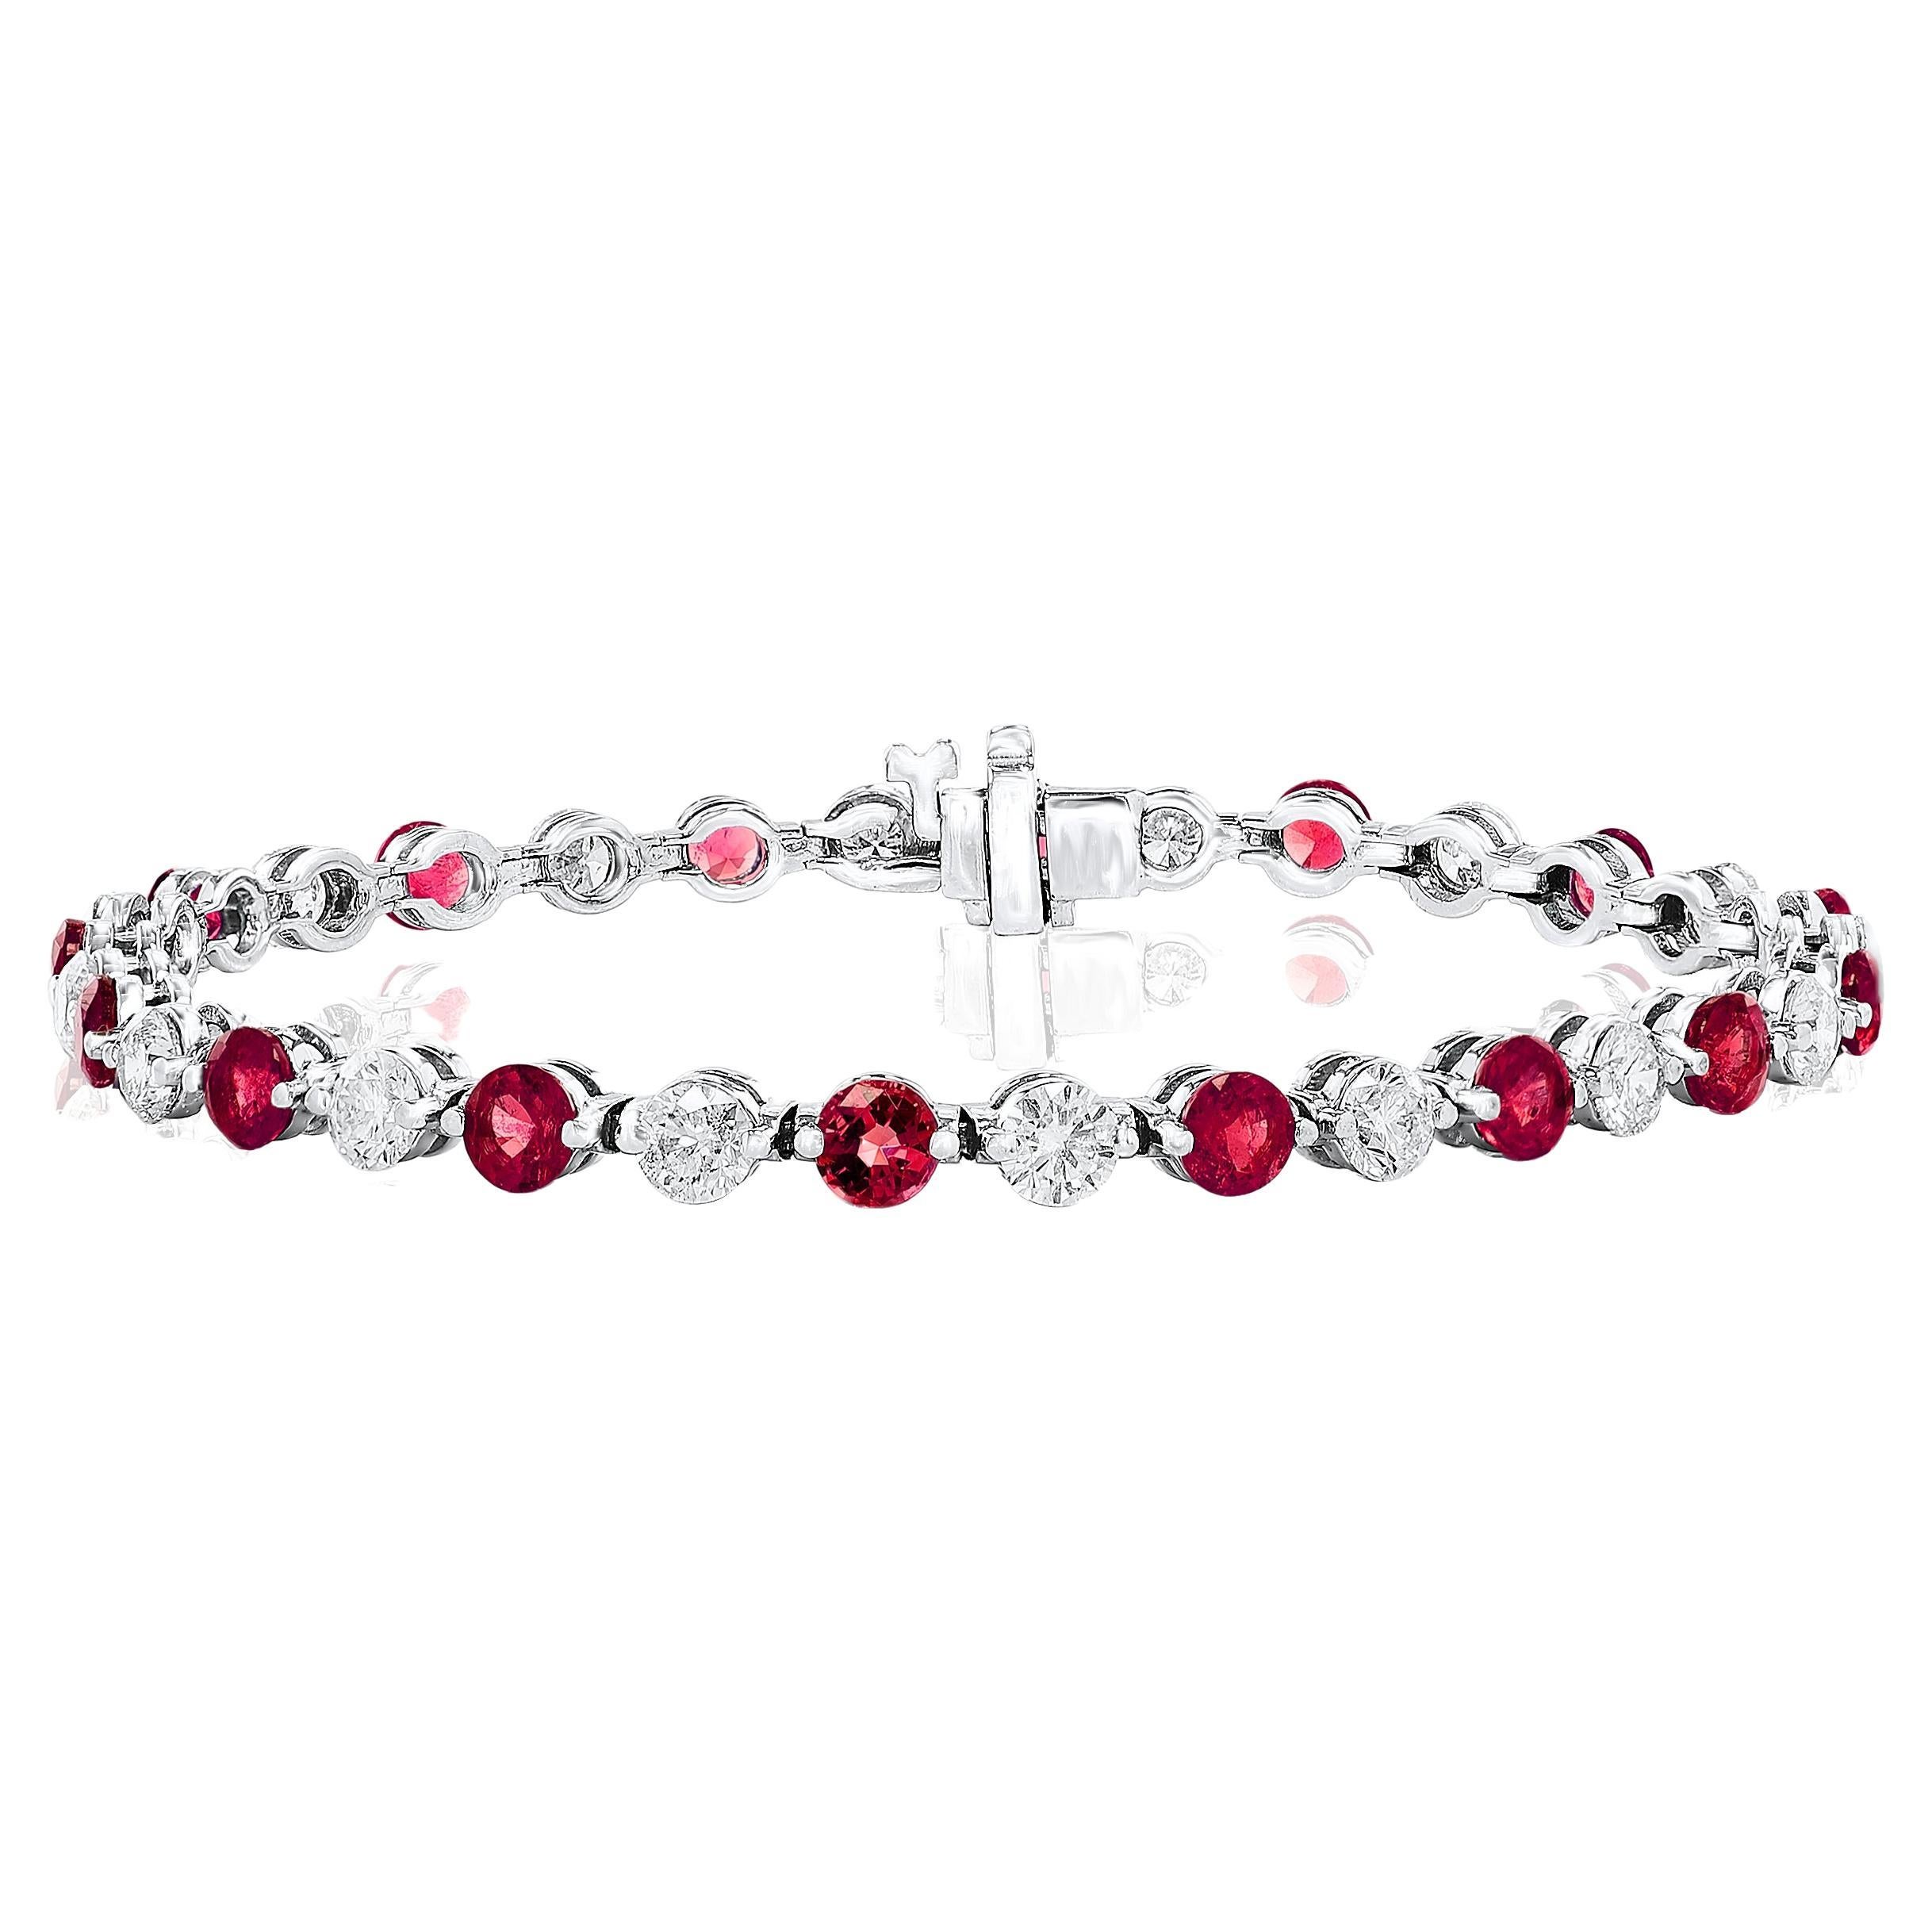 4.55 Carat Round Ruby and Diamond Bracelet in 14k White Gold For Sale